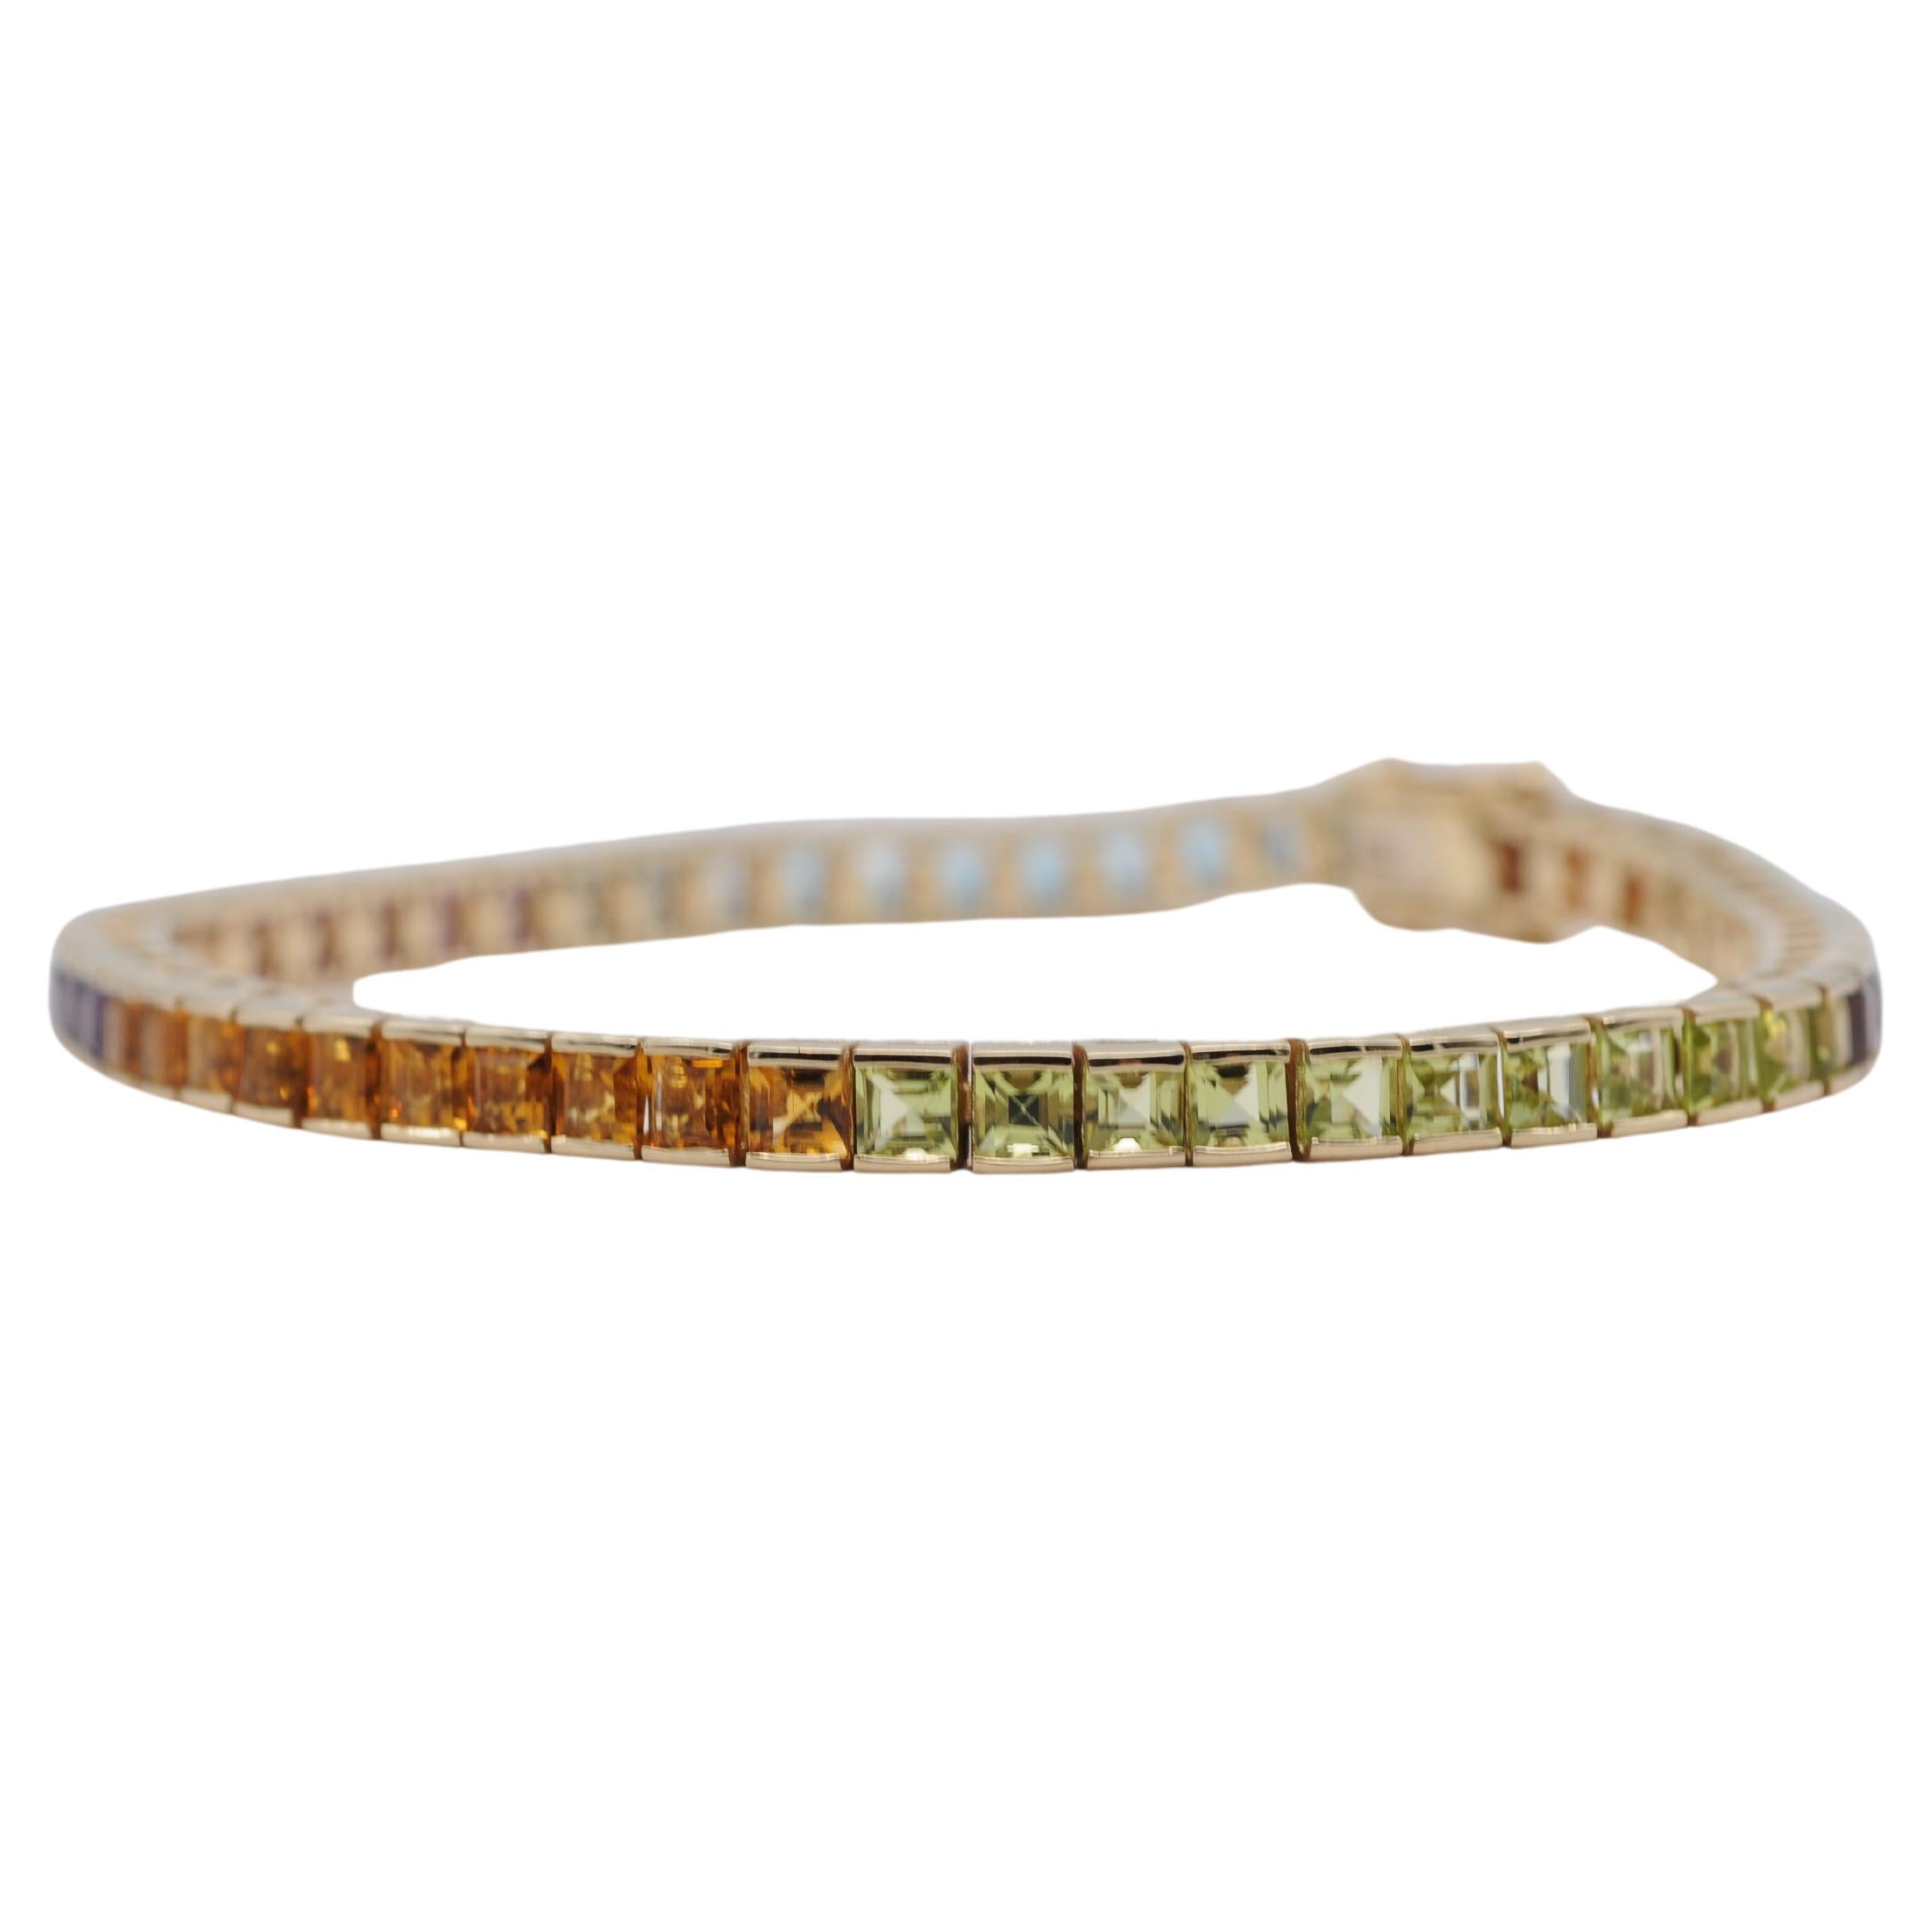 Indulge in the dreamlike beauty of this exquisite tutti frutti bracelet, adorned with an array of stunning gemstones totaling 56 in number, each meticulously cut in princess cut. This captivating piece features a harmonious blend of colors,